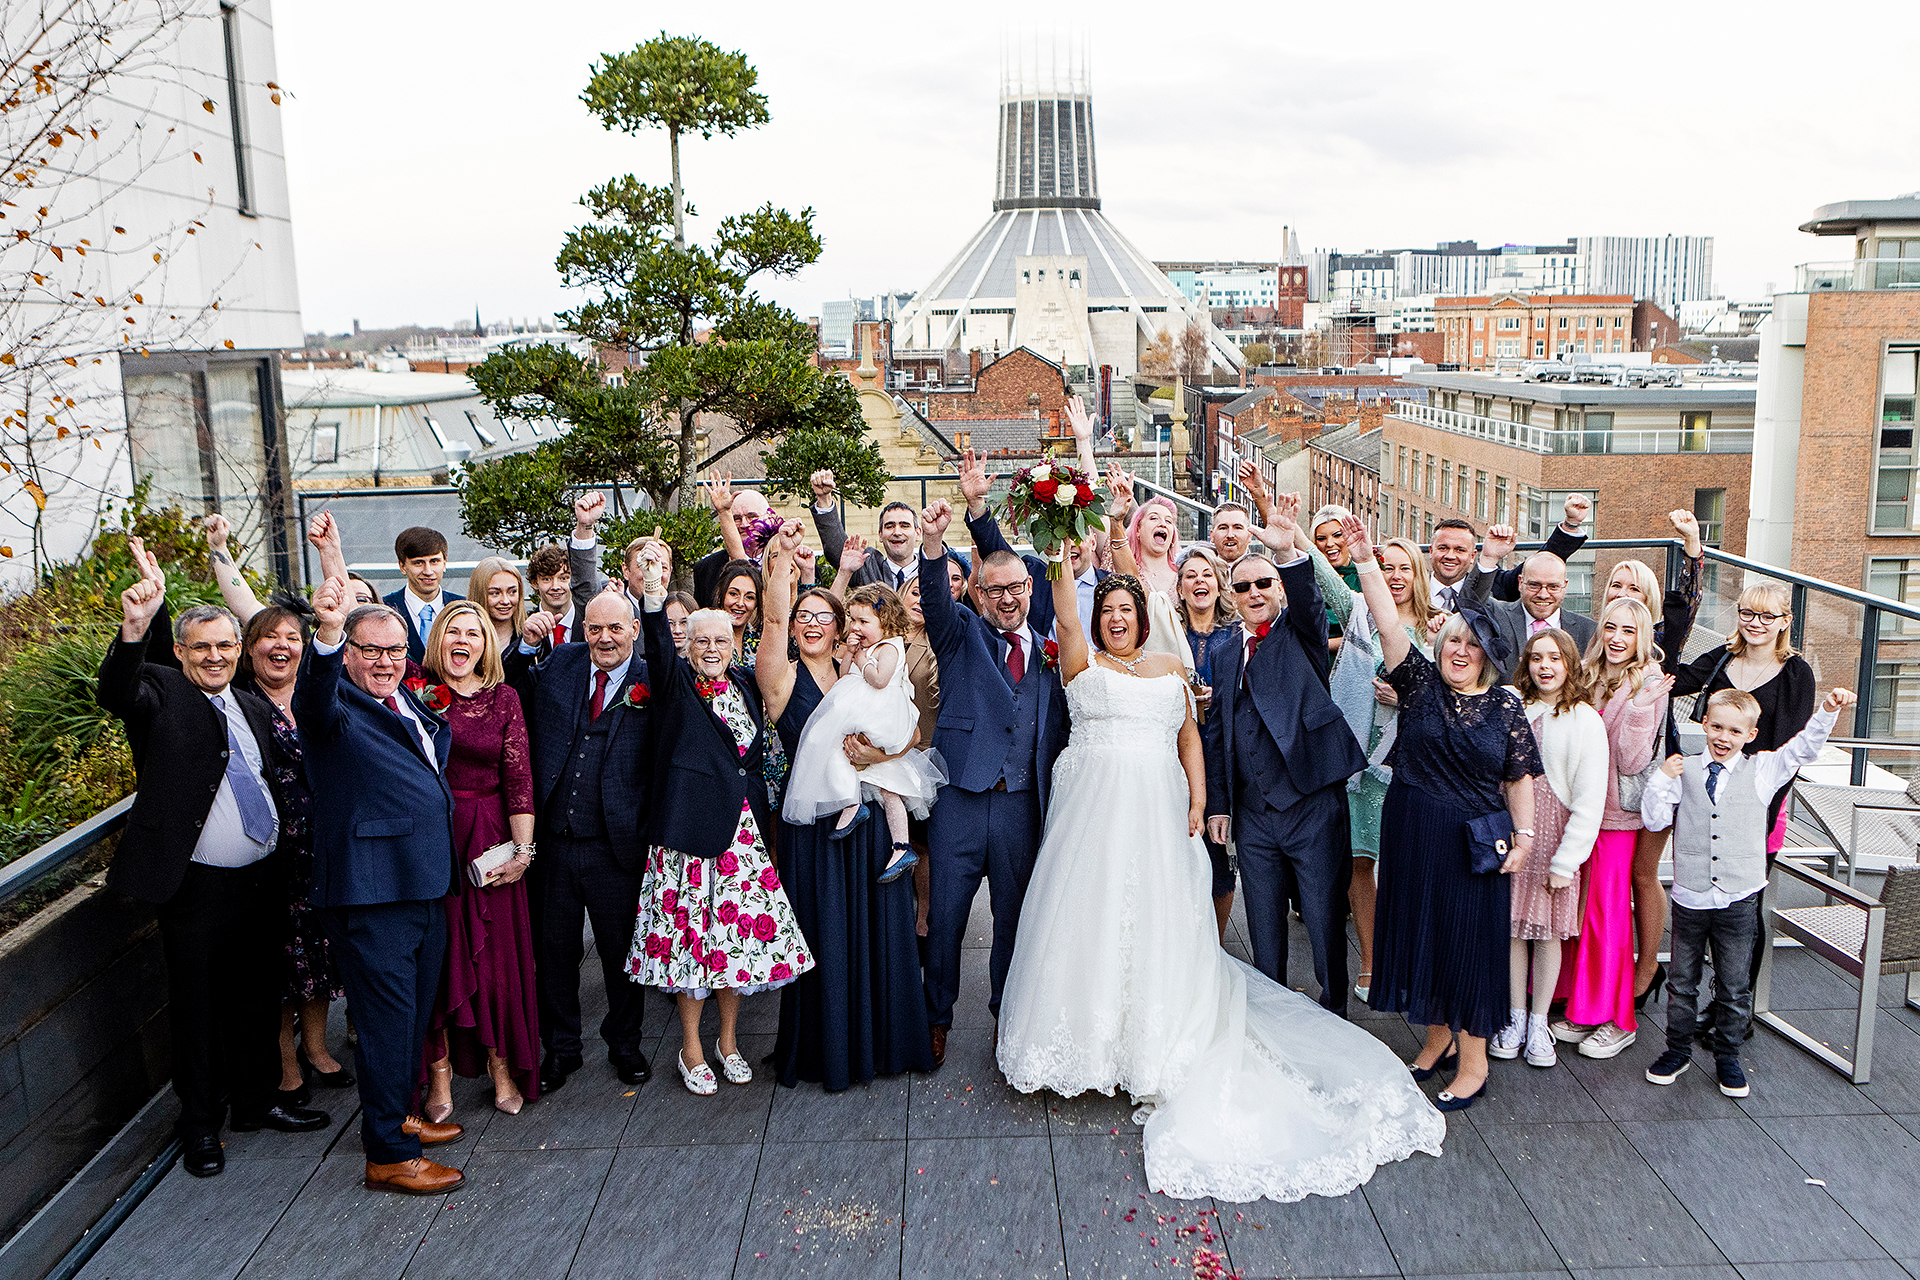 Wedding photography group shots at the Hope street hotel